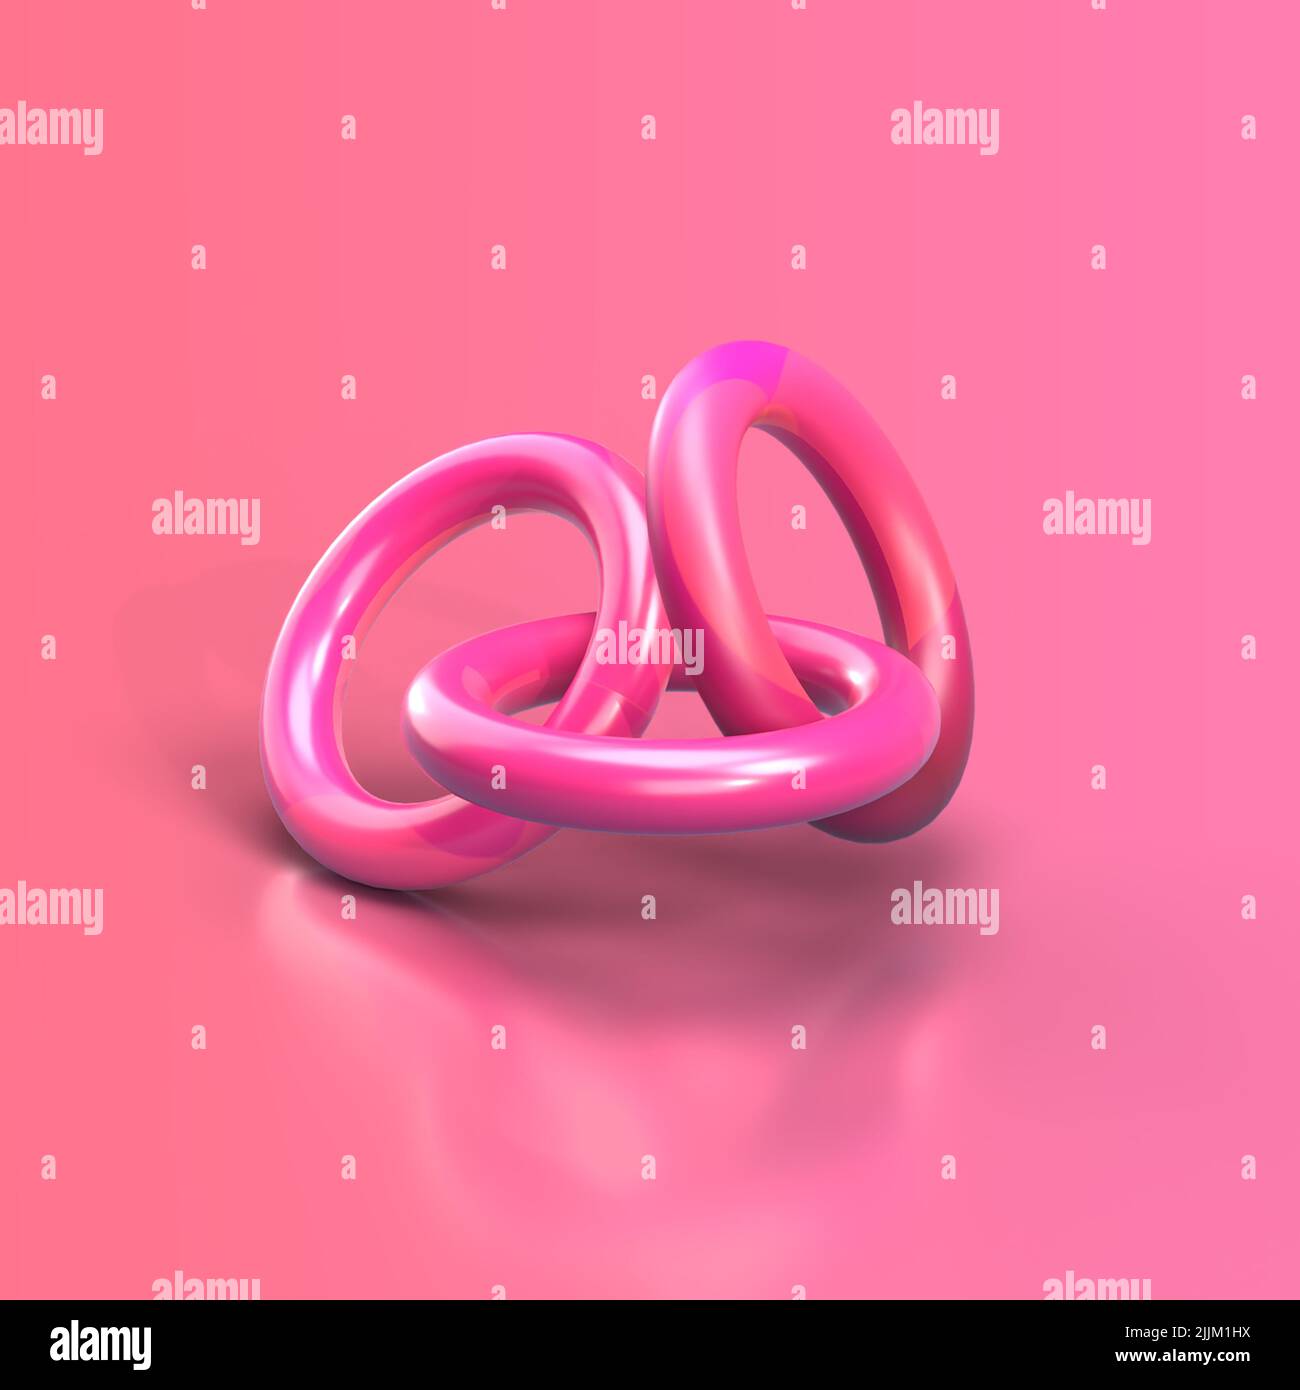 Three 3D Interlocking Rings on a pink background, 3D Render Stock Photo